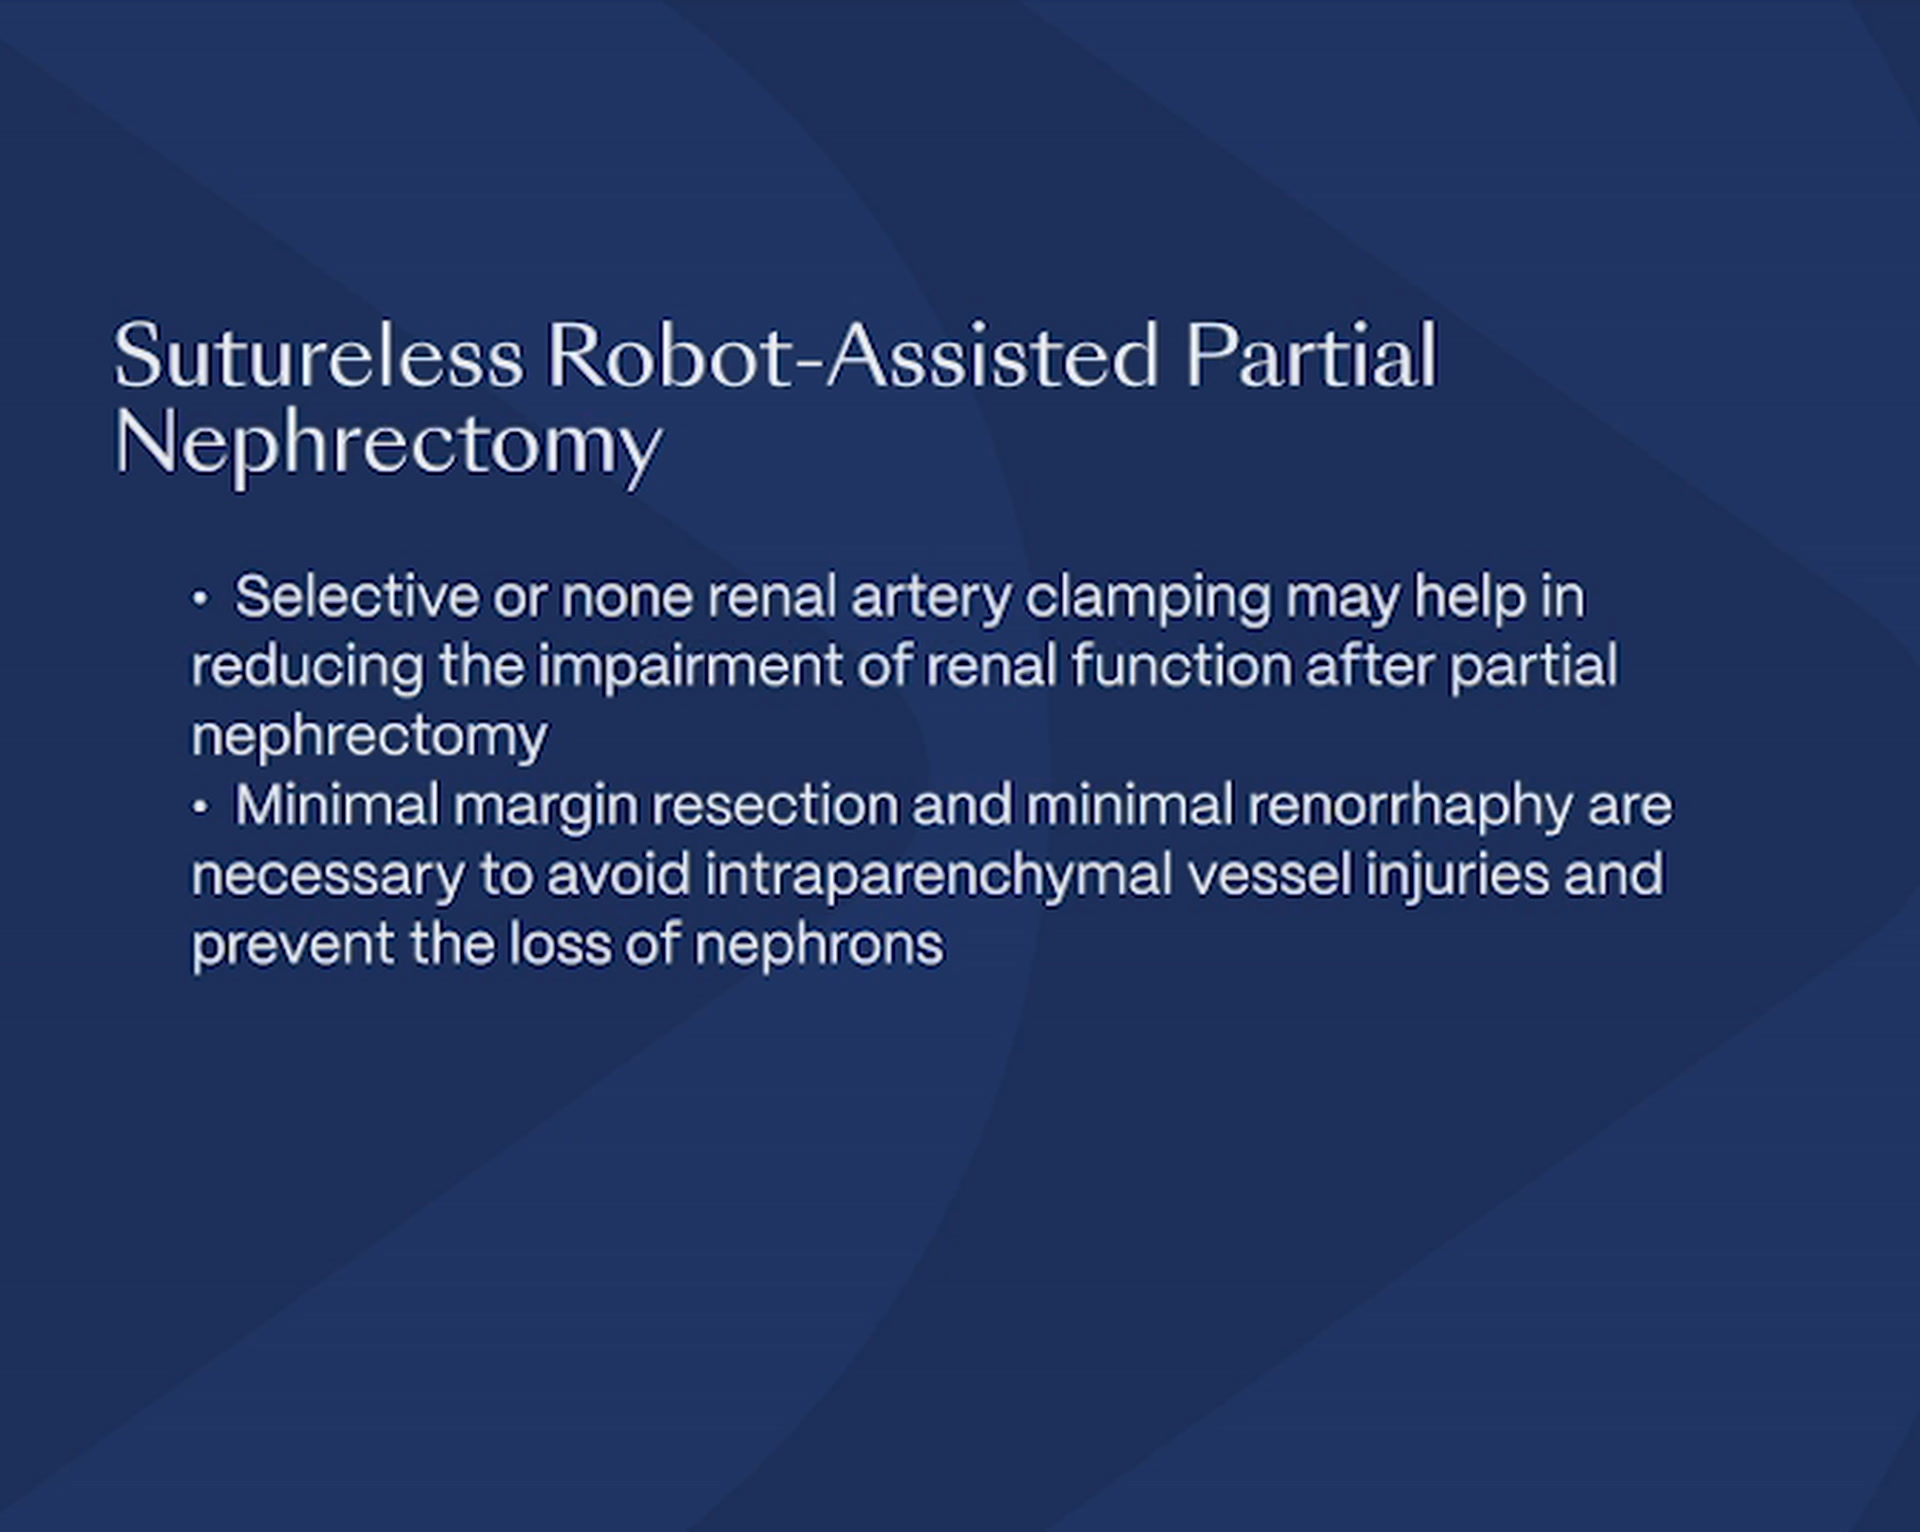 Sutureless and Clampless Robot-Assisted Partial Nephrectomy